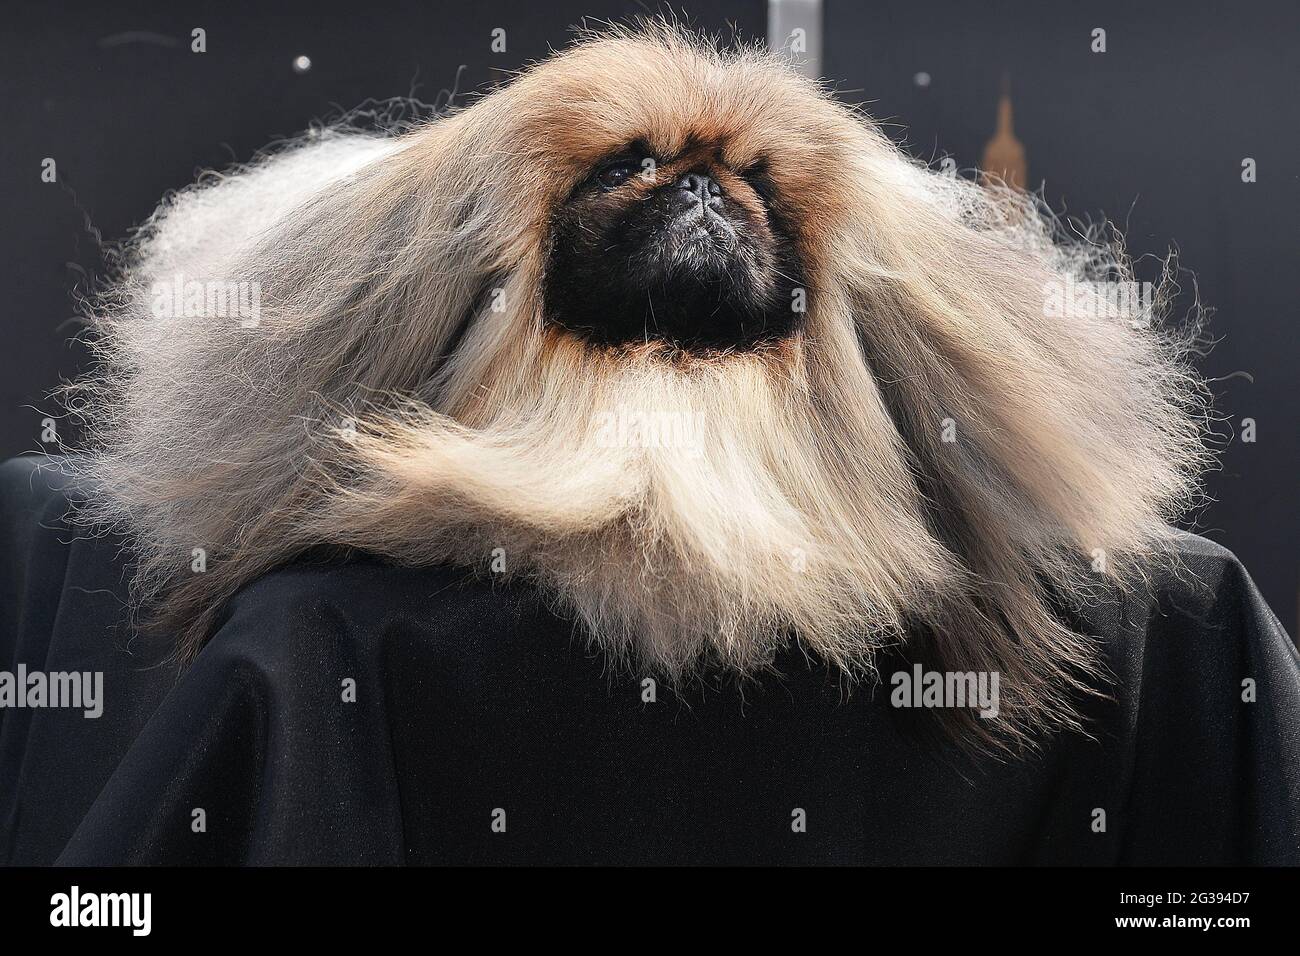 https://c8.alamy.com/comp/2G394D7/new-york-usa-14th-june-2021-wasabi-a-pekingese-which-won-best-in-show-at-the-145th-westminster-kennel-club-dog-show-poses-for-photographs-during-a-visit-to-the-empire-state-building-in-new-york-ny-june-14-2021-photo-by-anthony-beharsipa-usa-credit-sipa-usaalamy-live-news-2G394D7.jpg